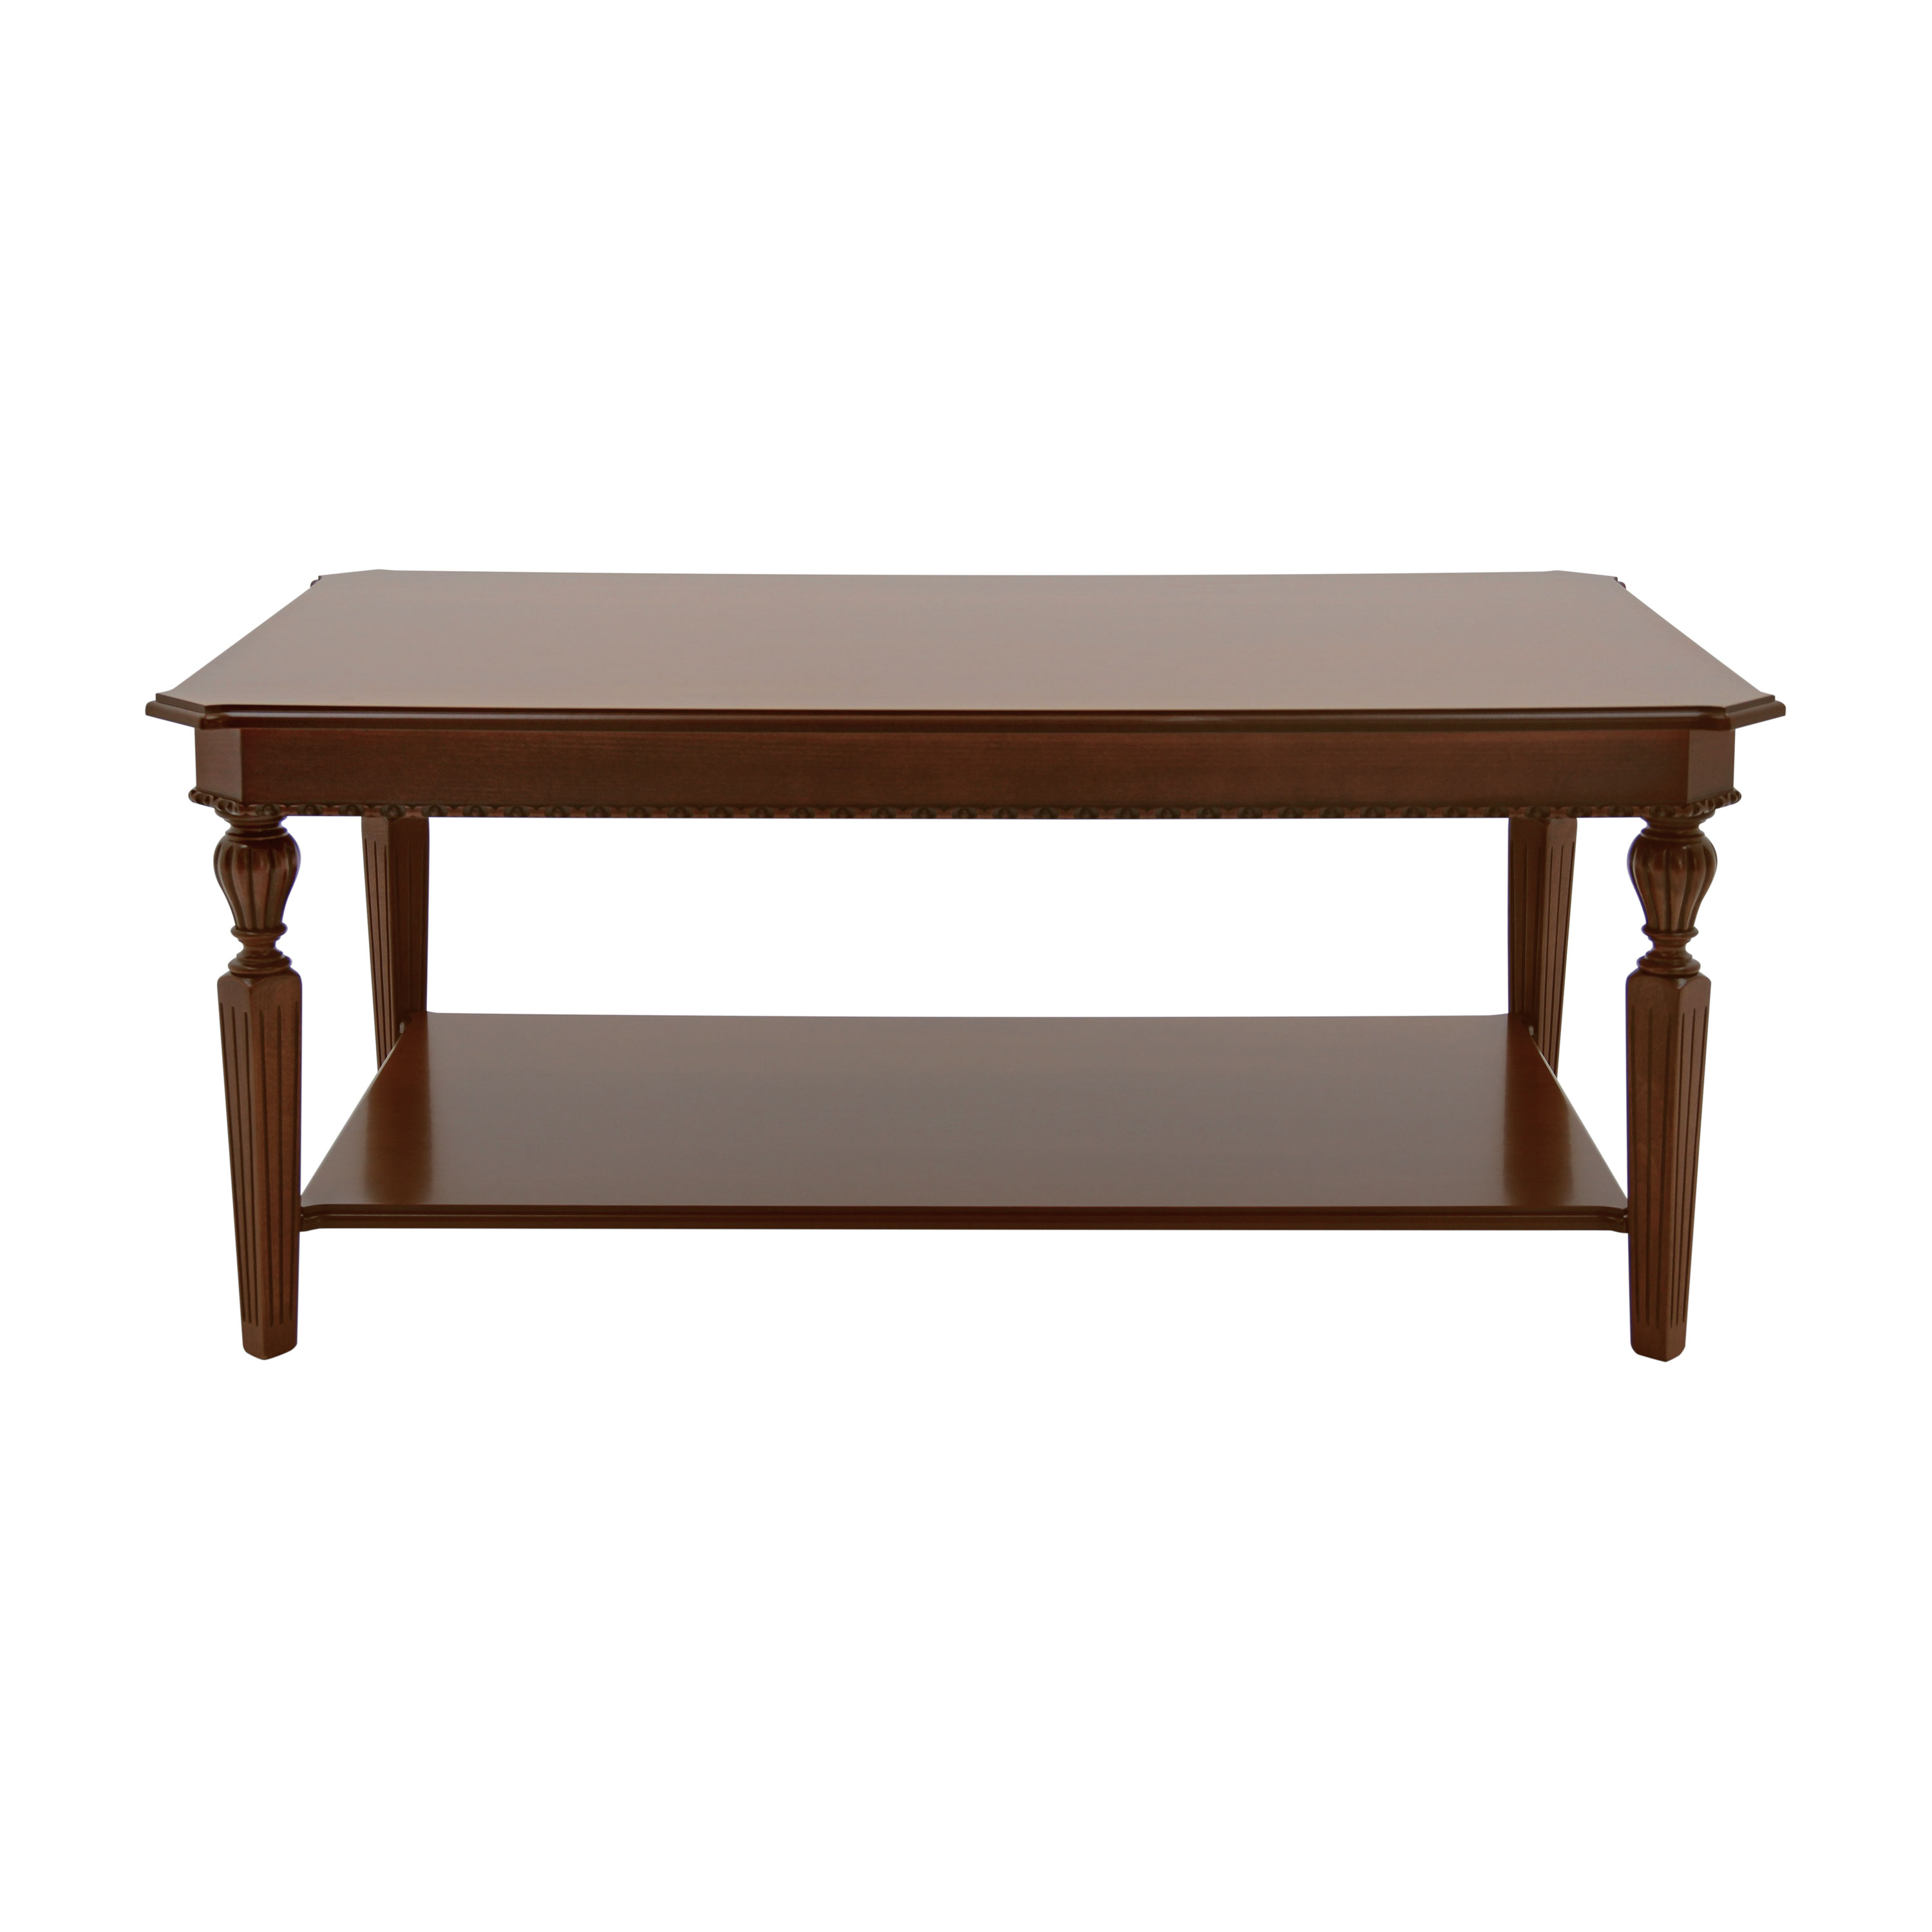 Wooden Rectangular Low Table in Classic Style Sinone